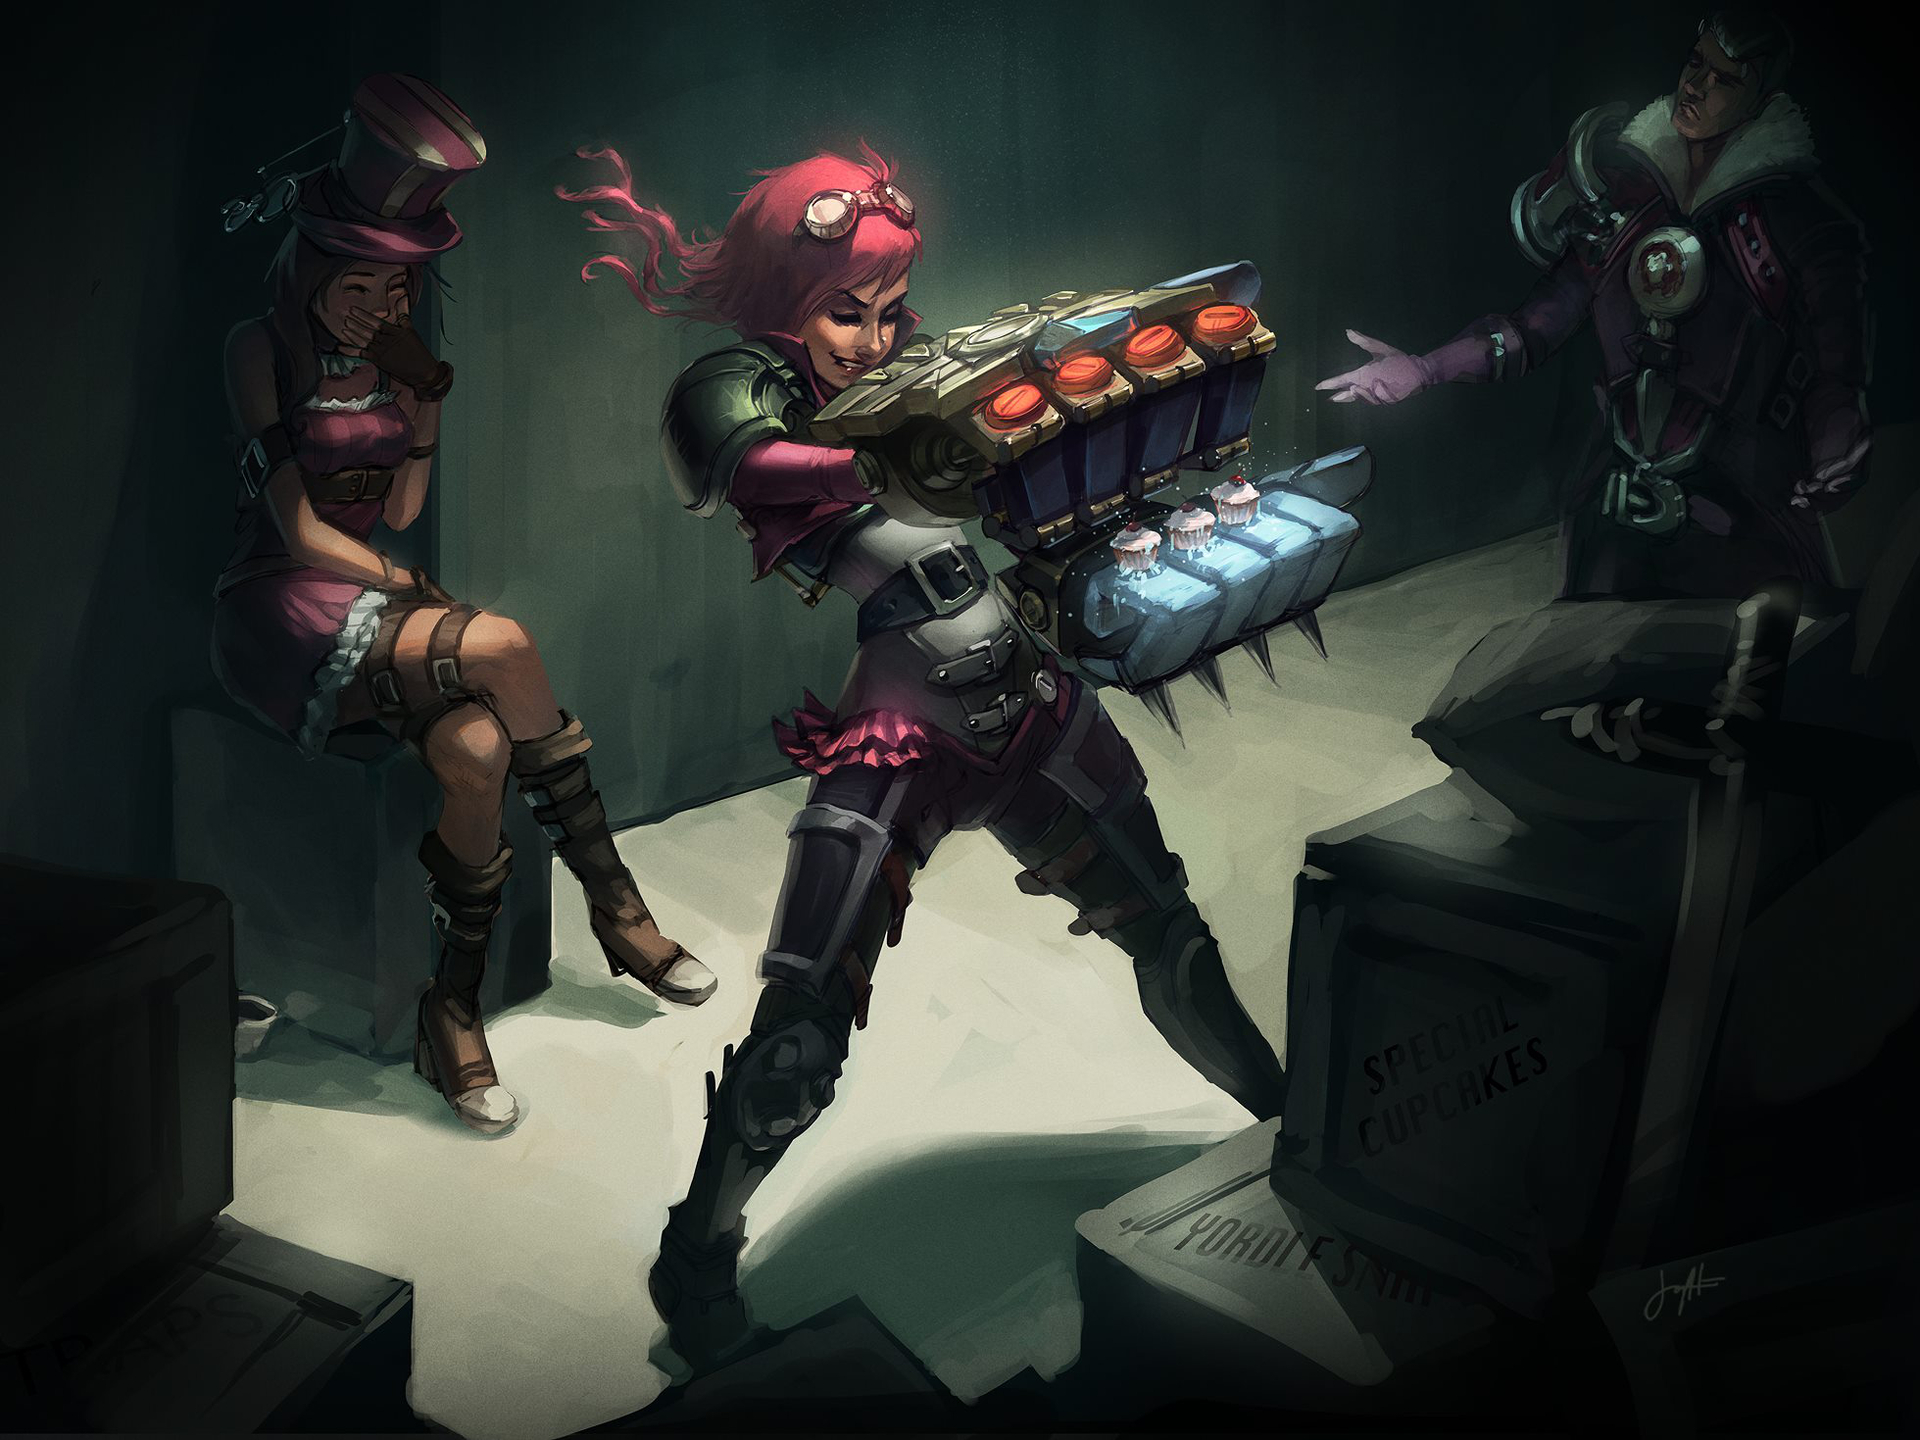 video game, league of legends, caitlyn (league of legends), jayce (league of legends), vi (league of legends)